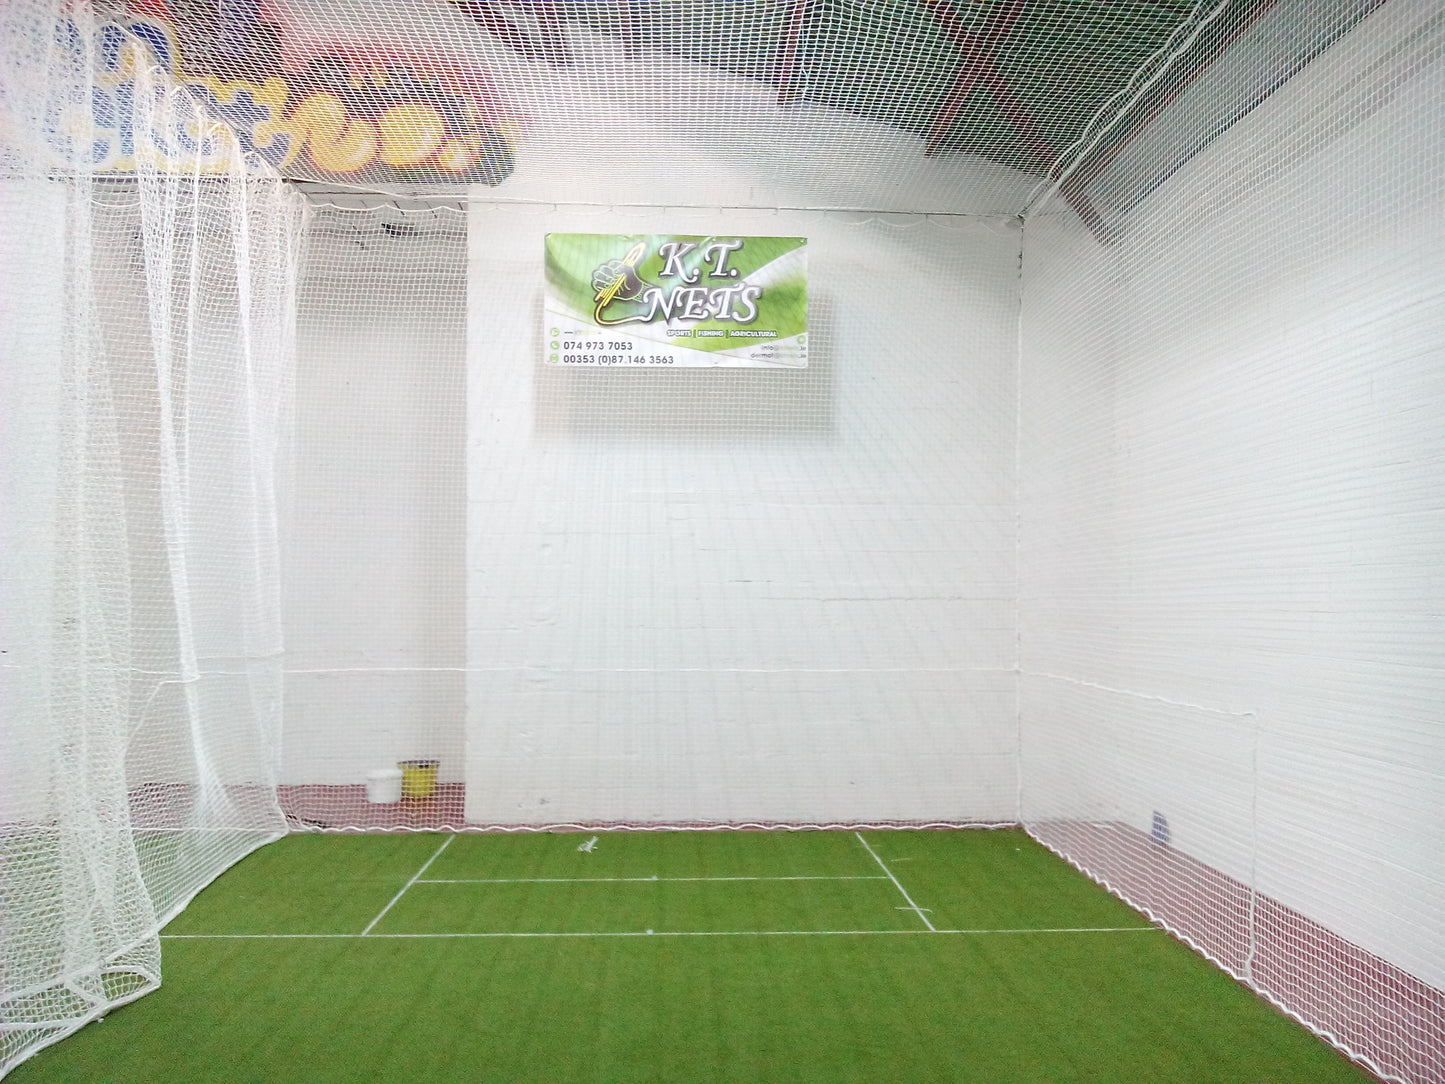 Cricket Cage Nets